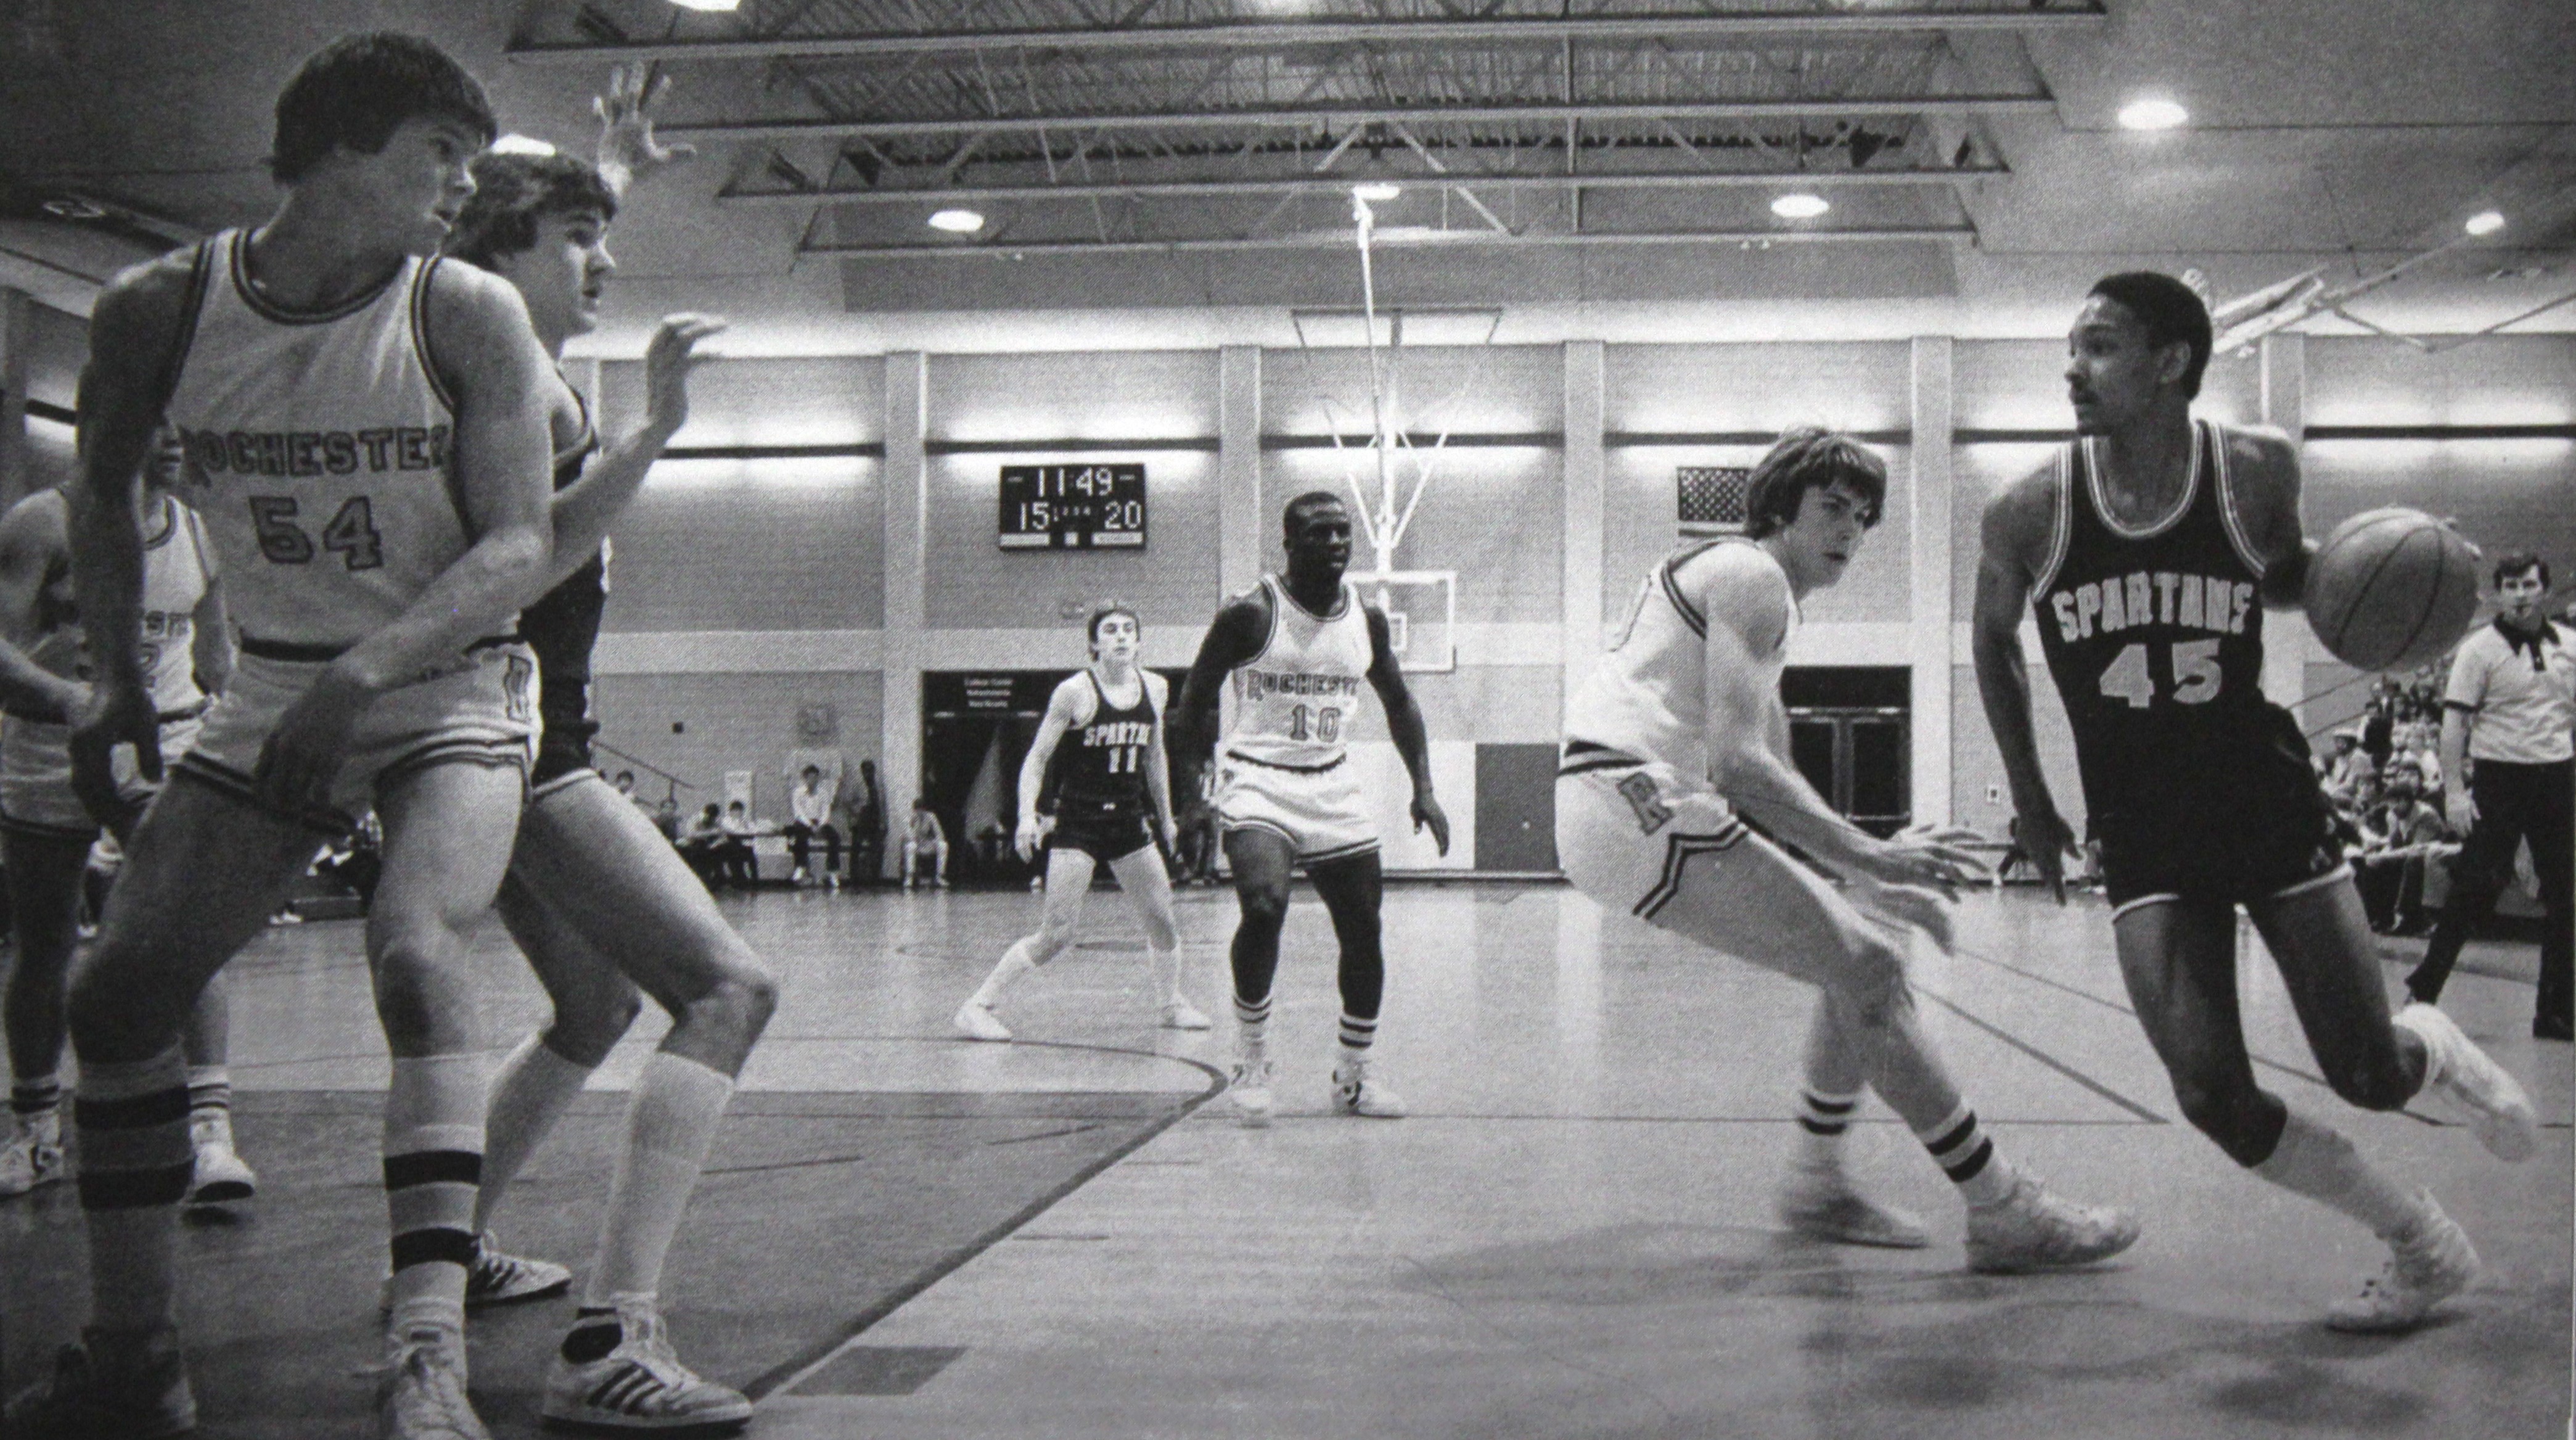 The Spartan basketball team plays a game in 1983